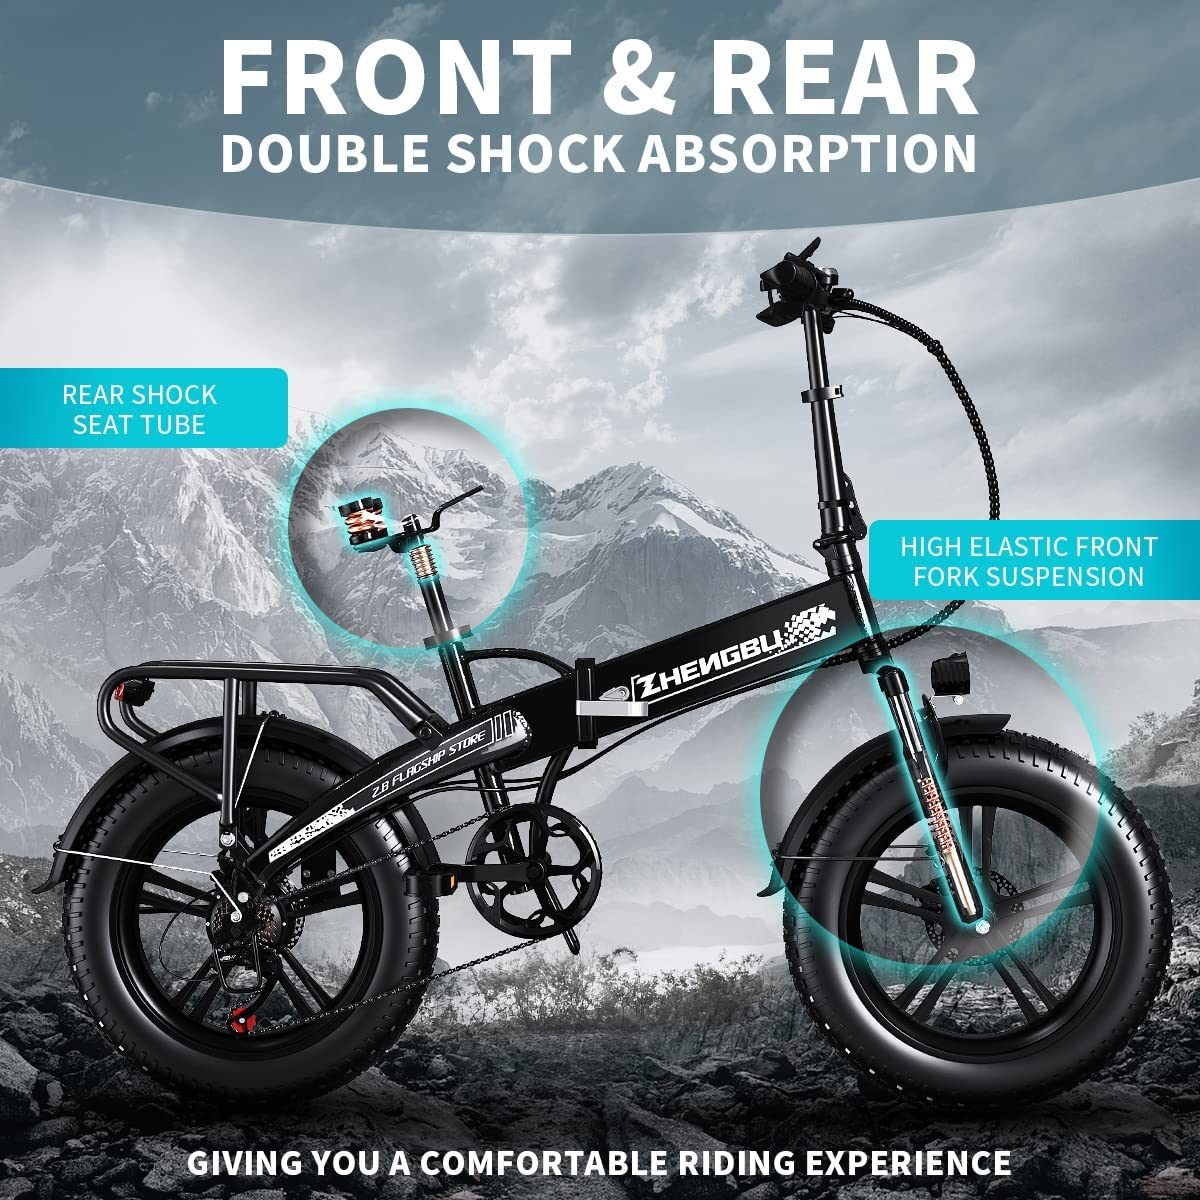 20" x 4.0" All Terrain Fat Tire Electric bike with Samsung 48V 12.8Ah Lithium Battery